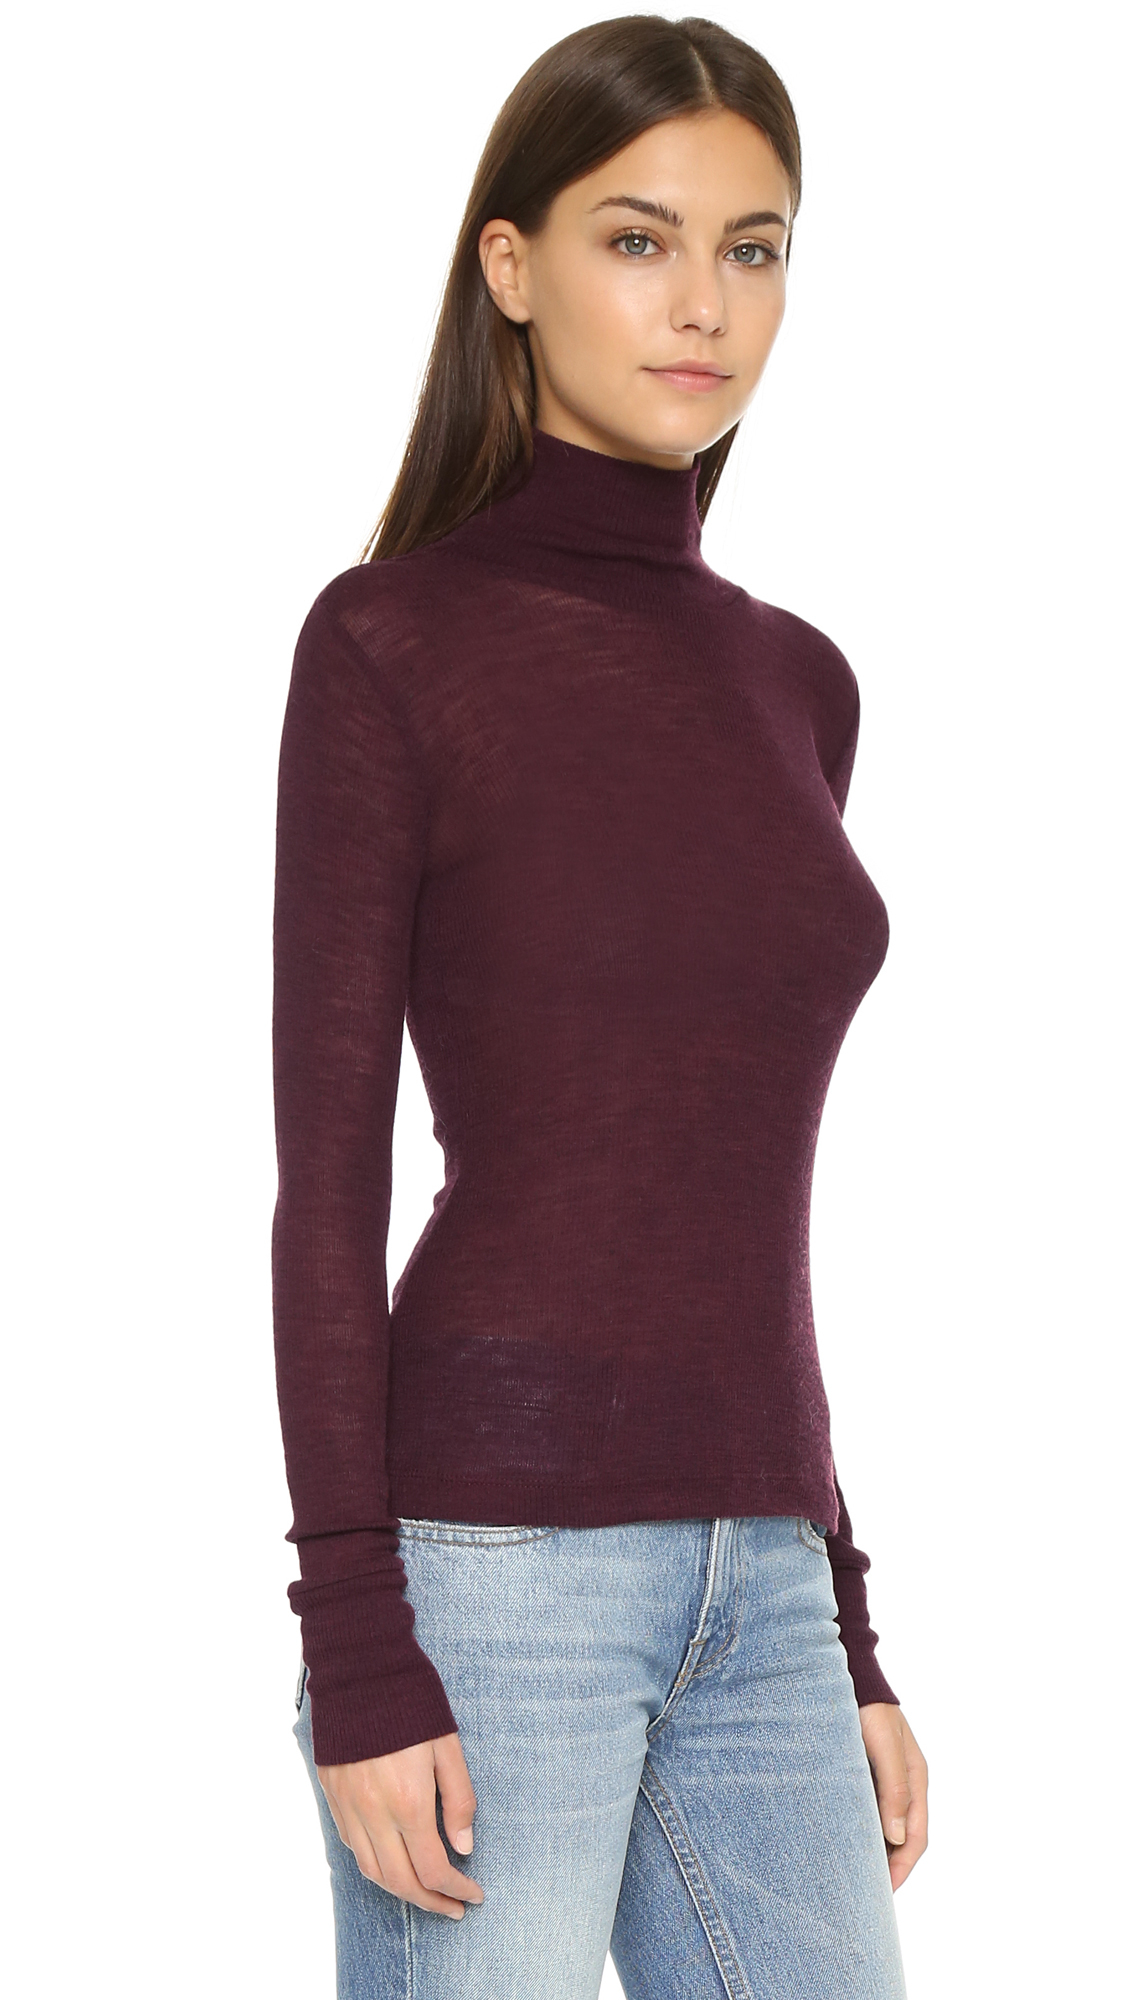 Lyst - T By Alexander Wang Wooly Ribbed Fitted Turtleneck - Black in Purple